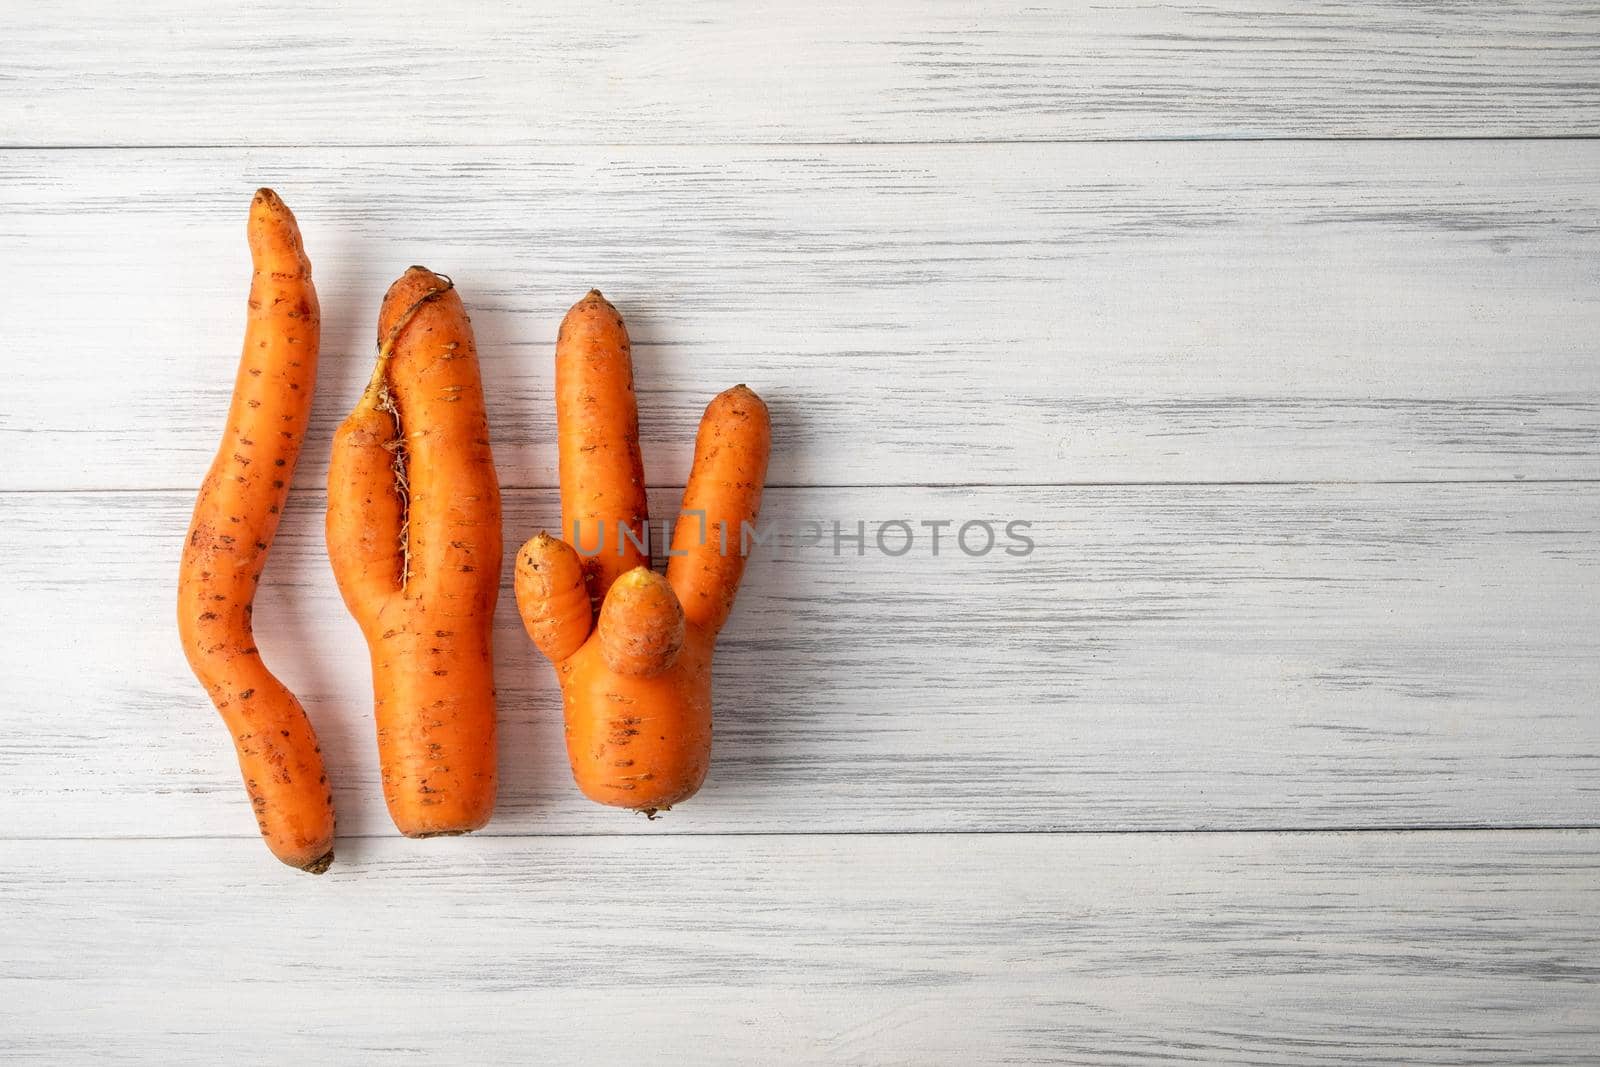 Top view close-up of several ripe orange ugly carrots lie on a light wooden surface with copy space for text. Selective focus.